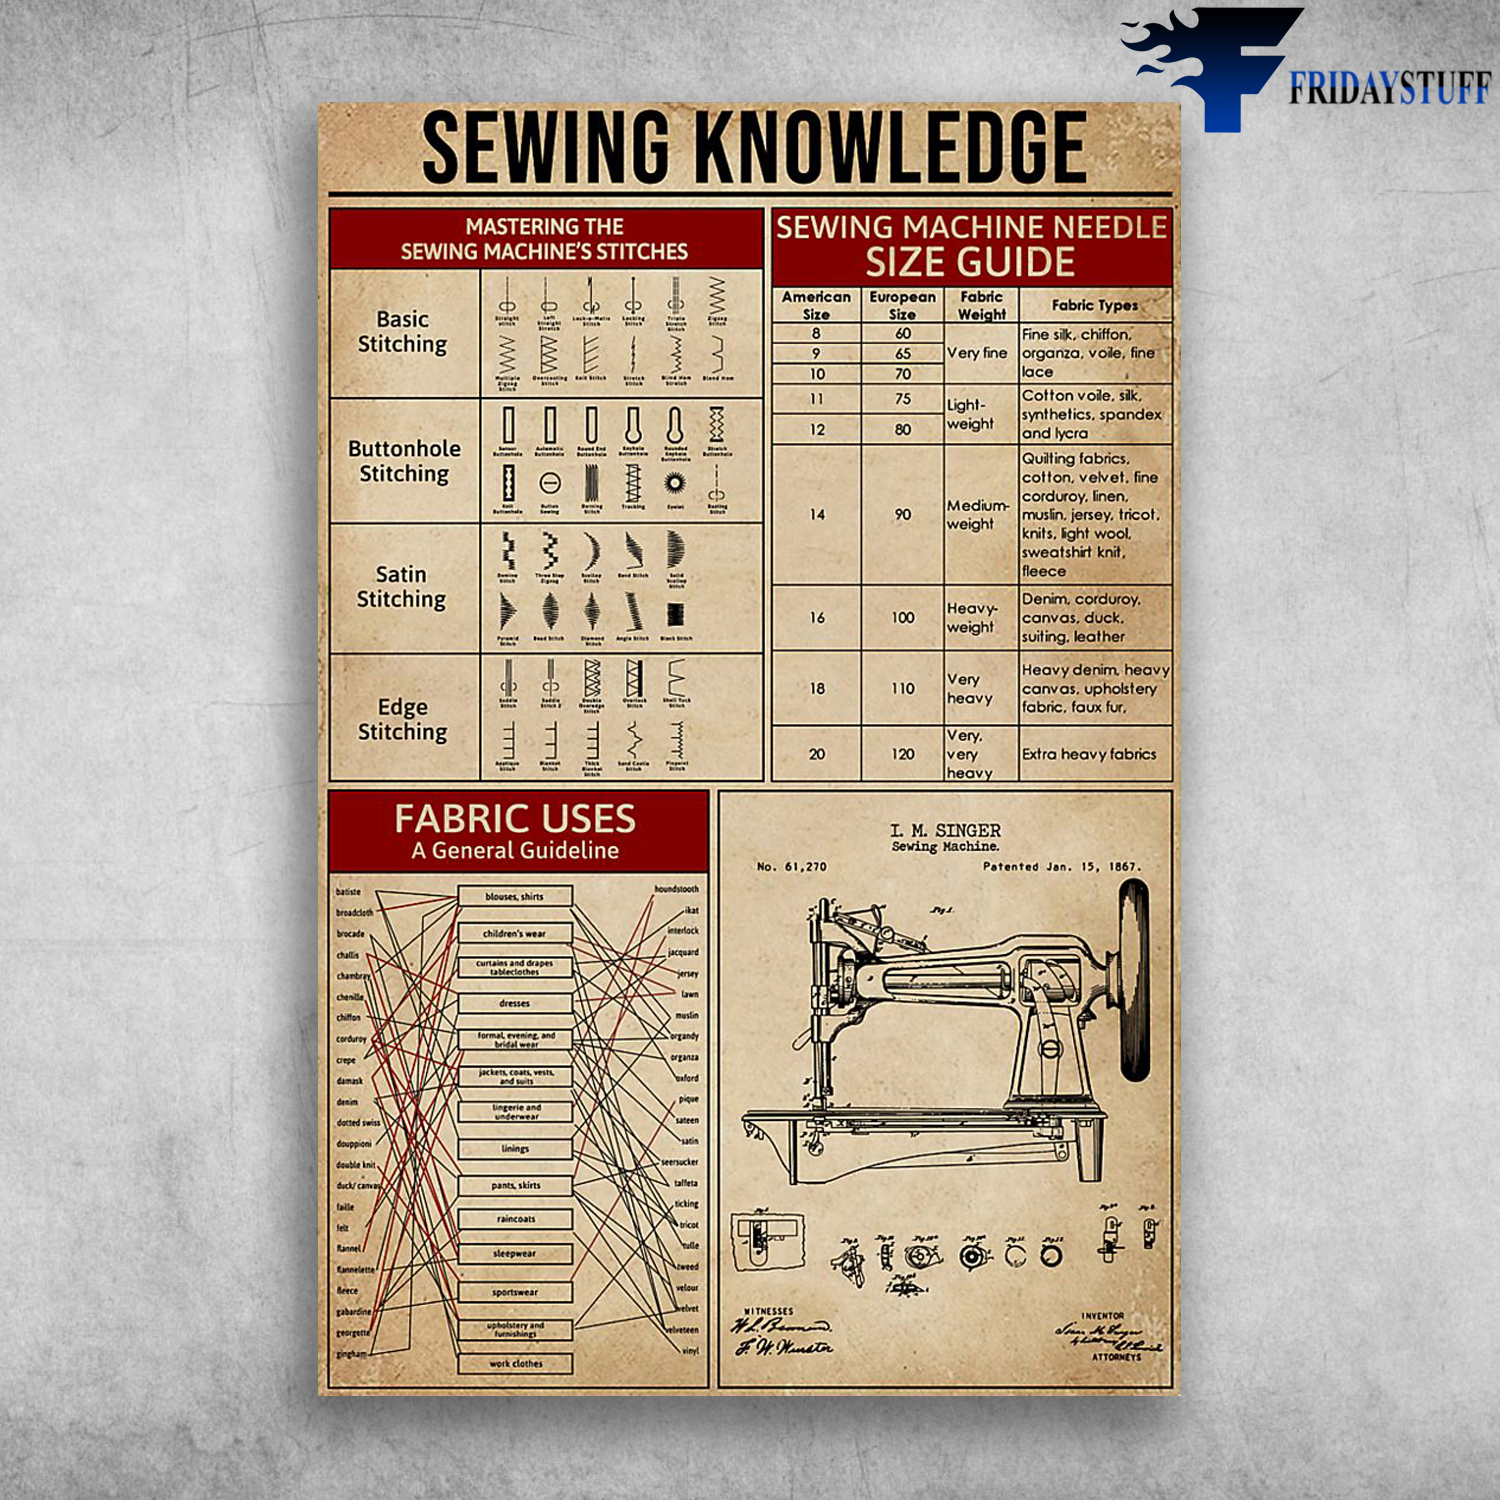 Sewing Knowledge Mastering The Sewing Machine's Stitches